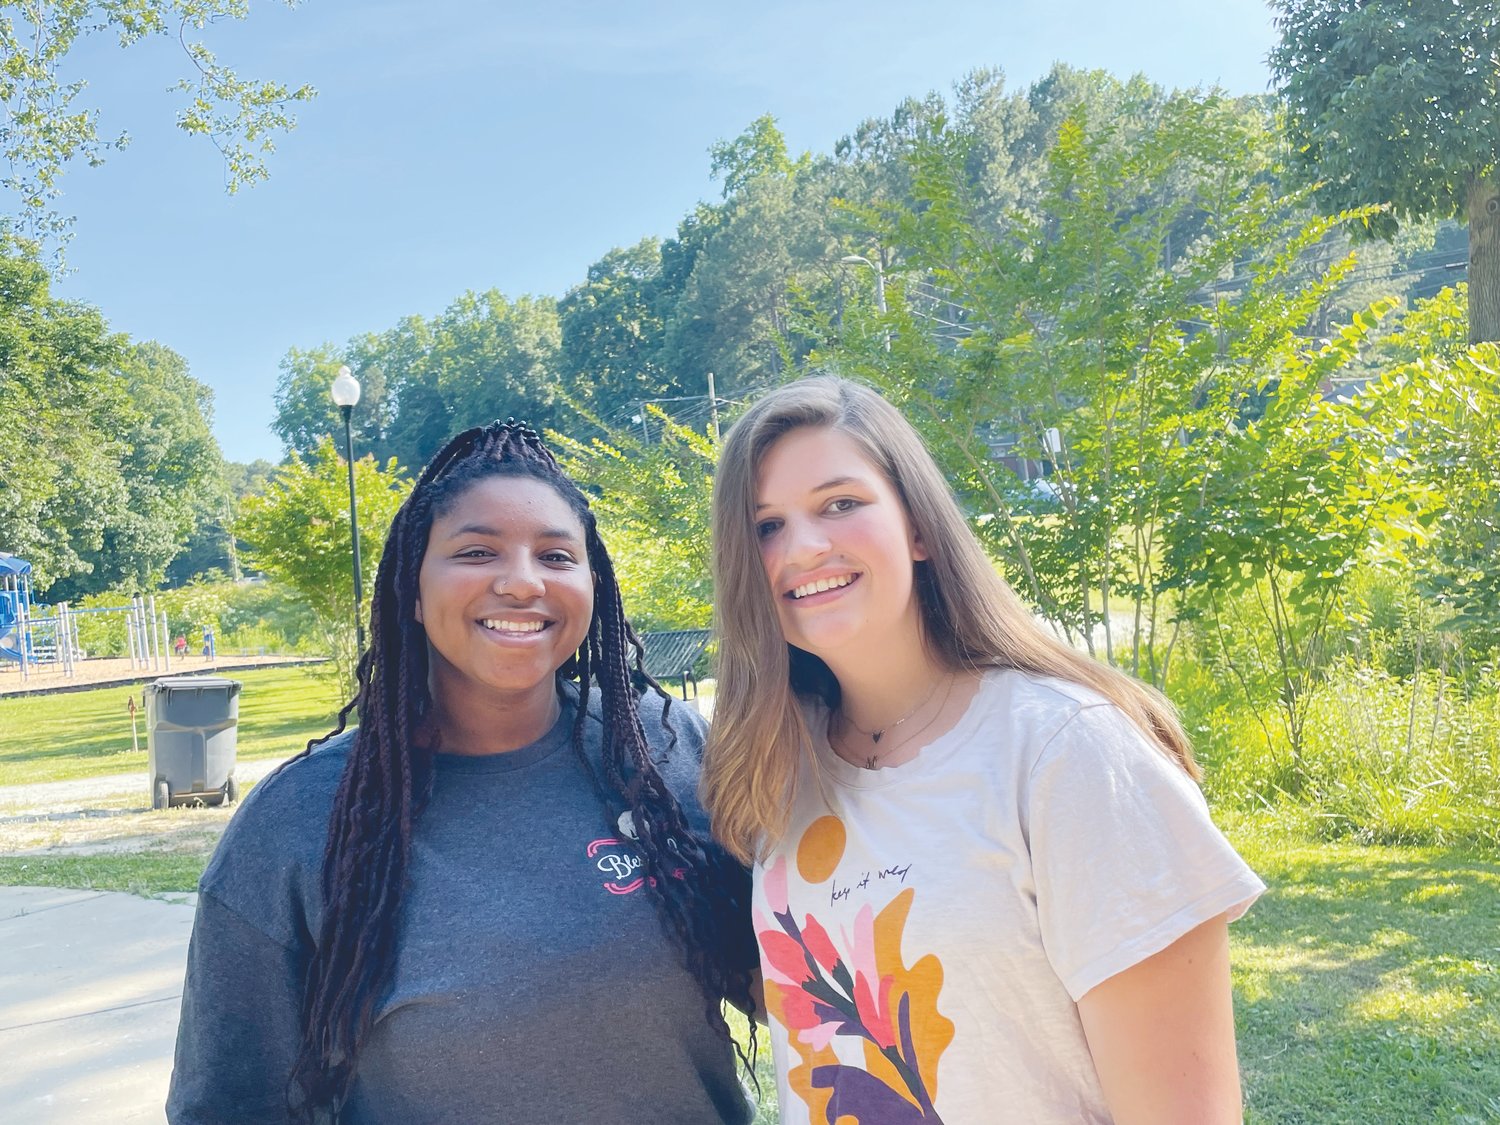 Massiah Smith (left) and Mary Harris met through the Chatham County Schools Virtual Academy. Their virtual friendship is now taking them on a trip across Europe together.